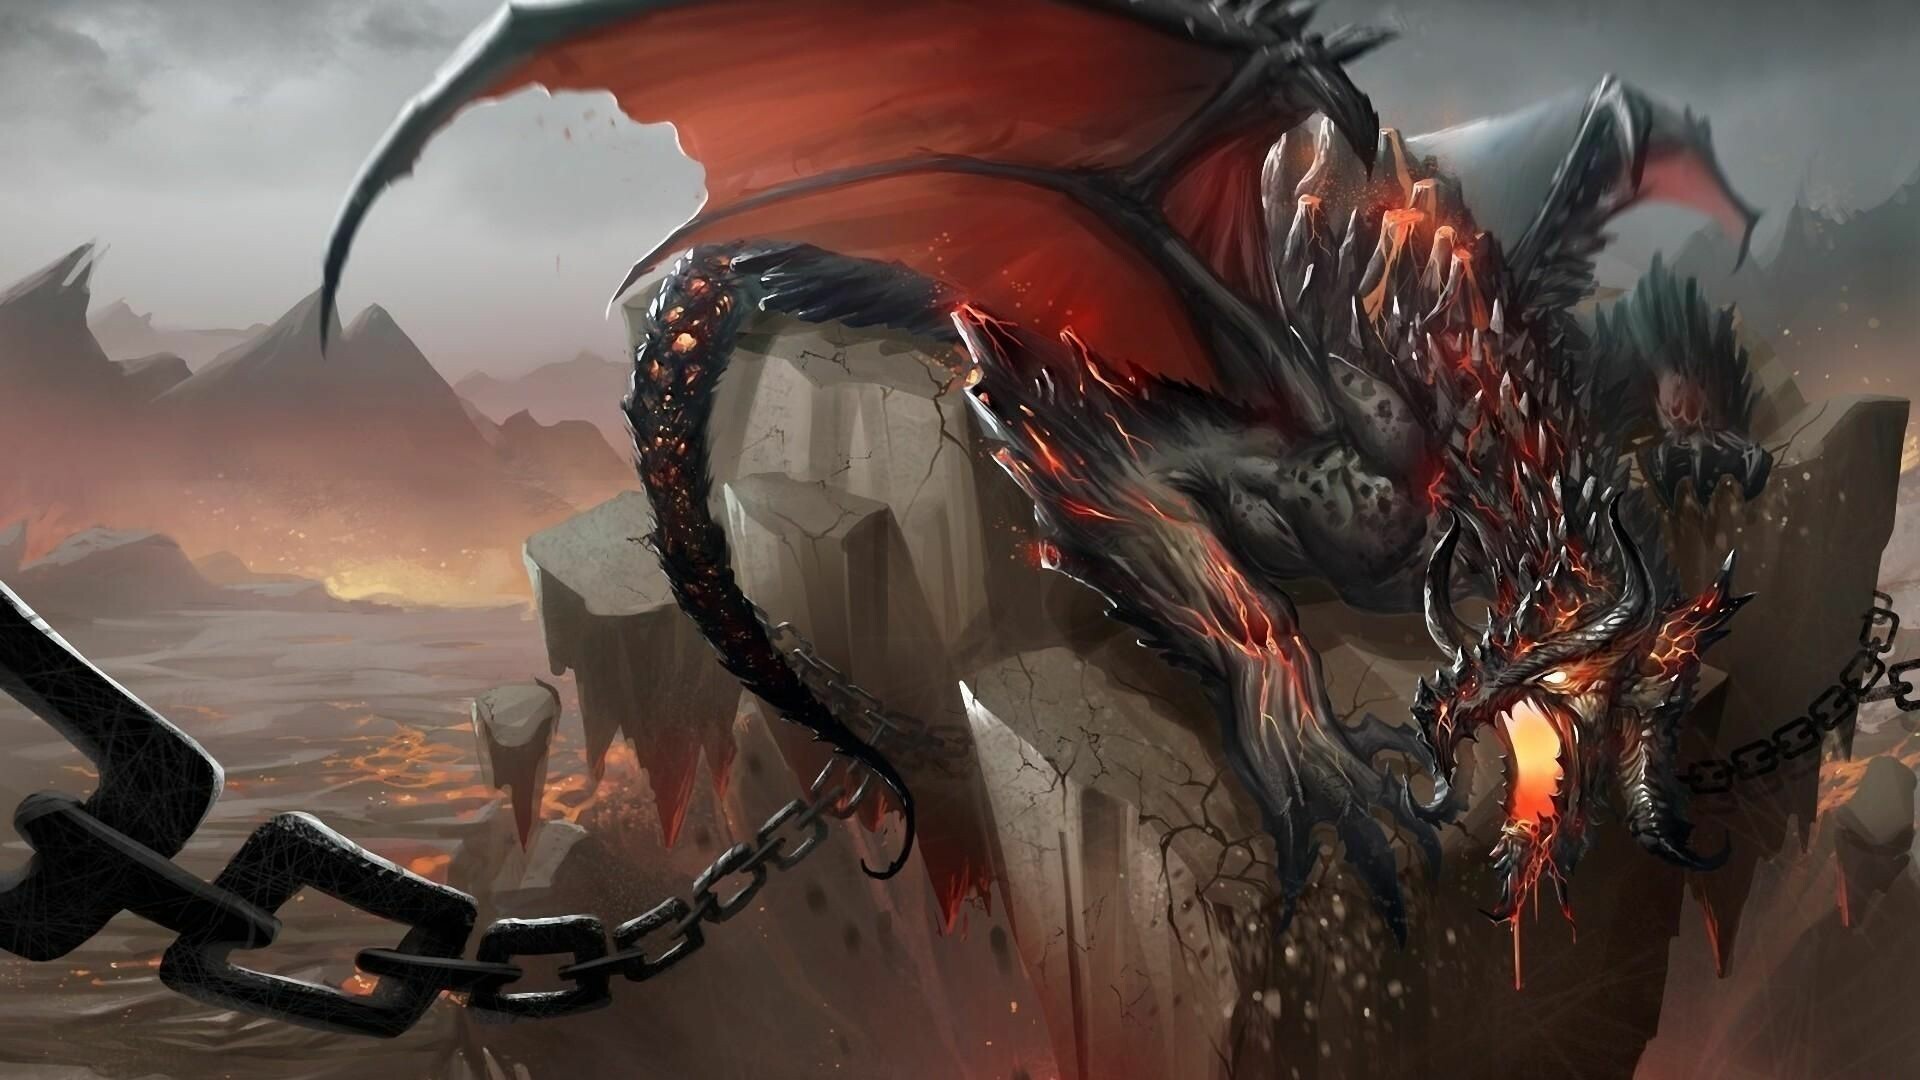 Demon Dragon Wallpaper: HD, 4K, 5K for PC and Mobile. Download free image for iPhone, Android